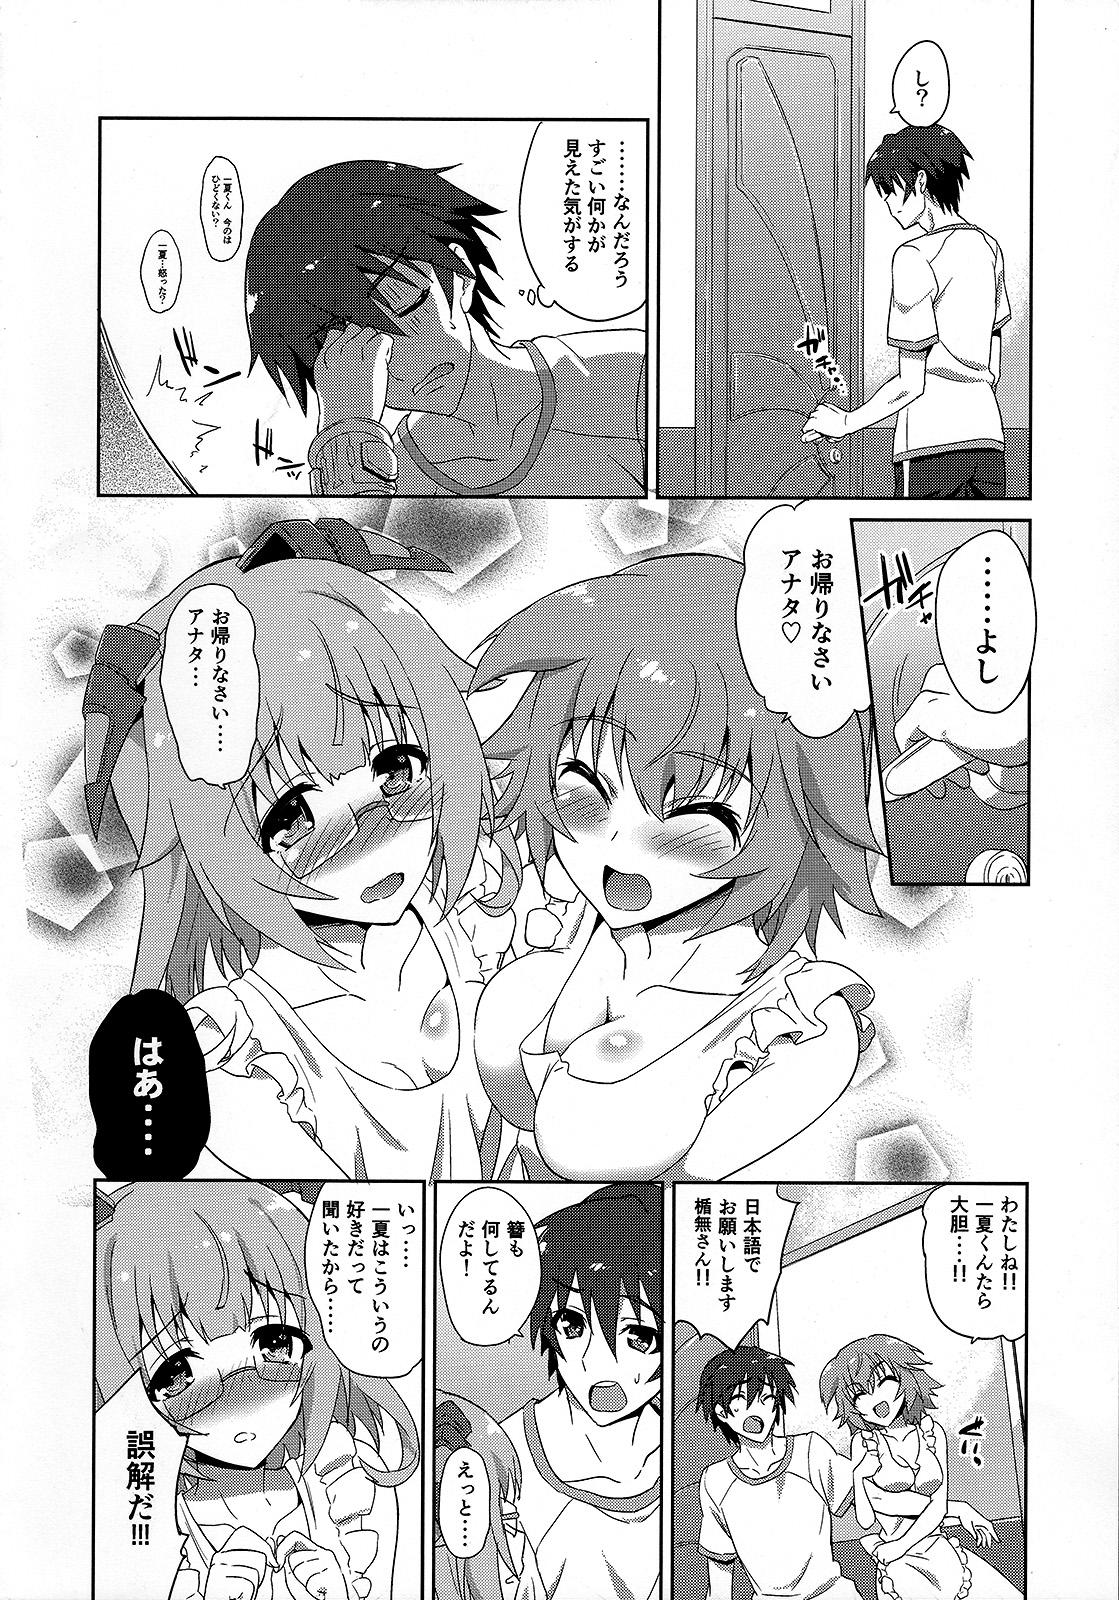 Raw IS ICHIKA LOVE SISTERS!! - Infinite stratos Shoes - Page 3